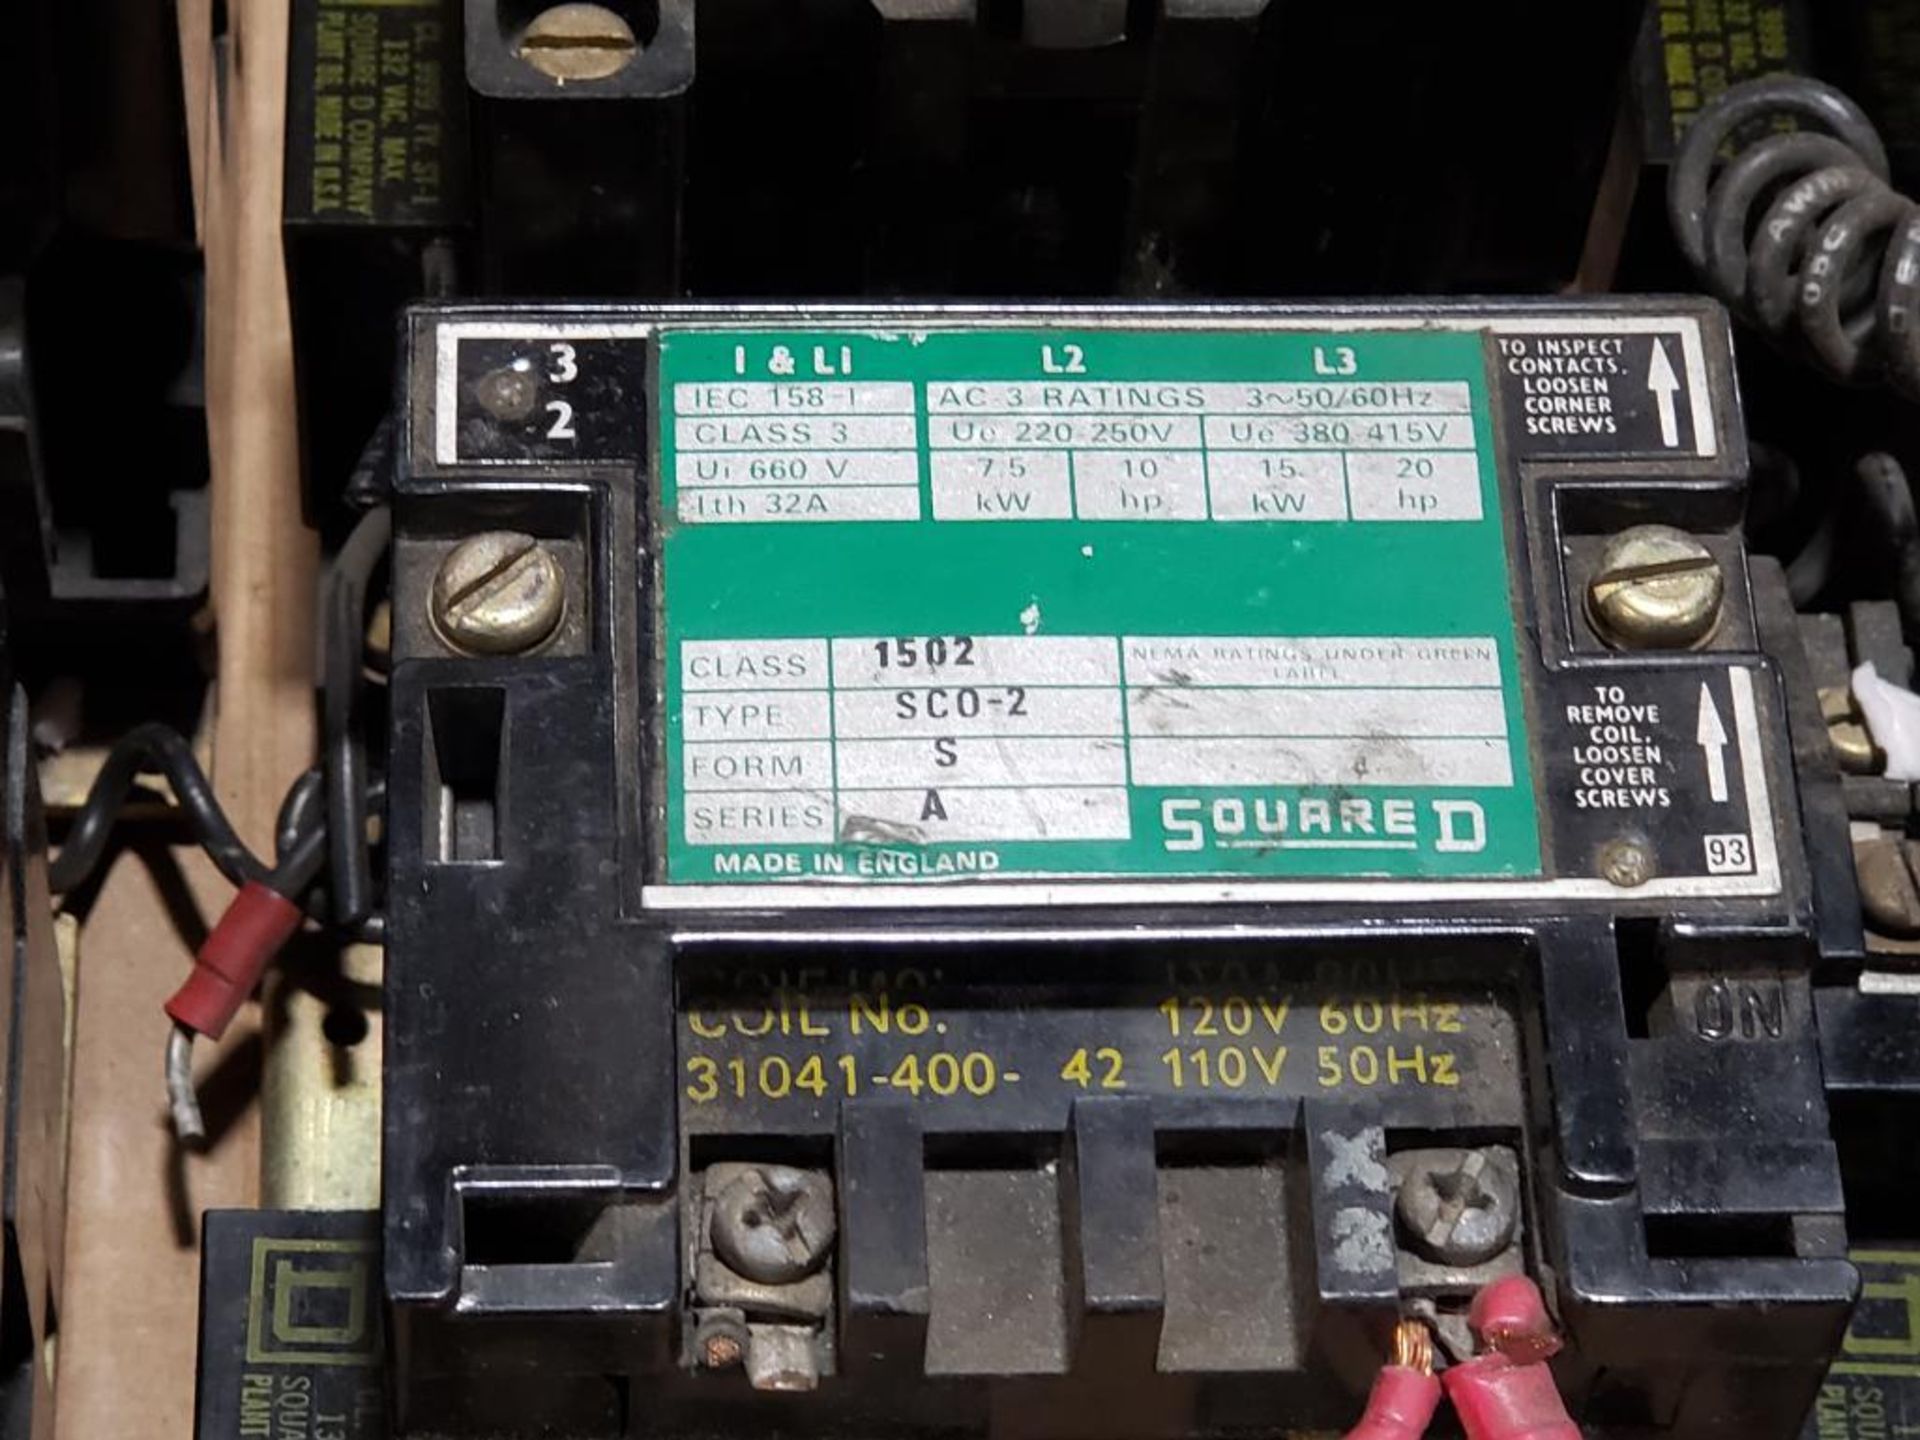 Qty 12 - Square D contactor. Class 1502 type SCO-2. - Image 12 of 14